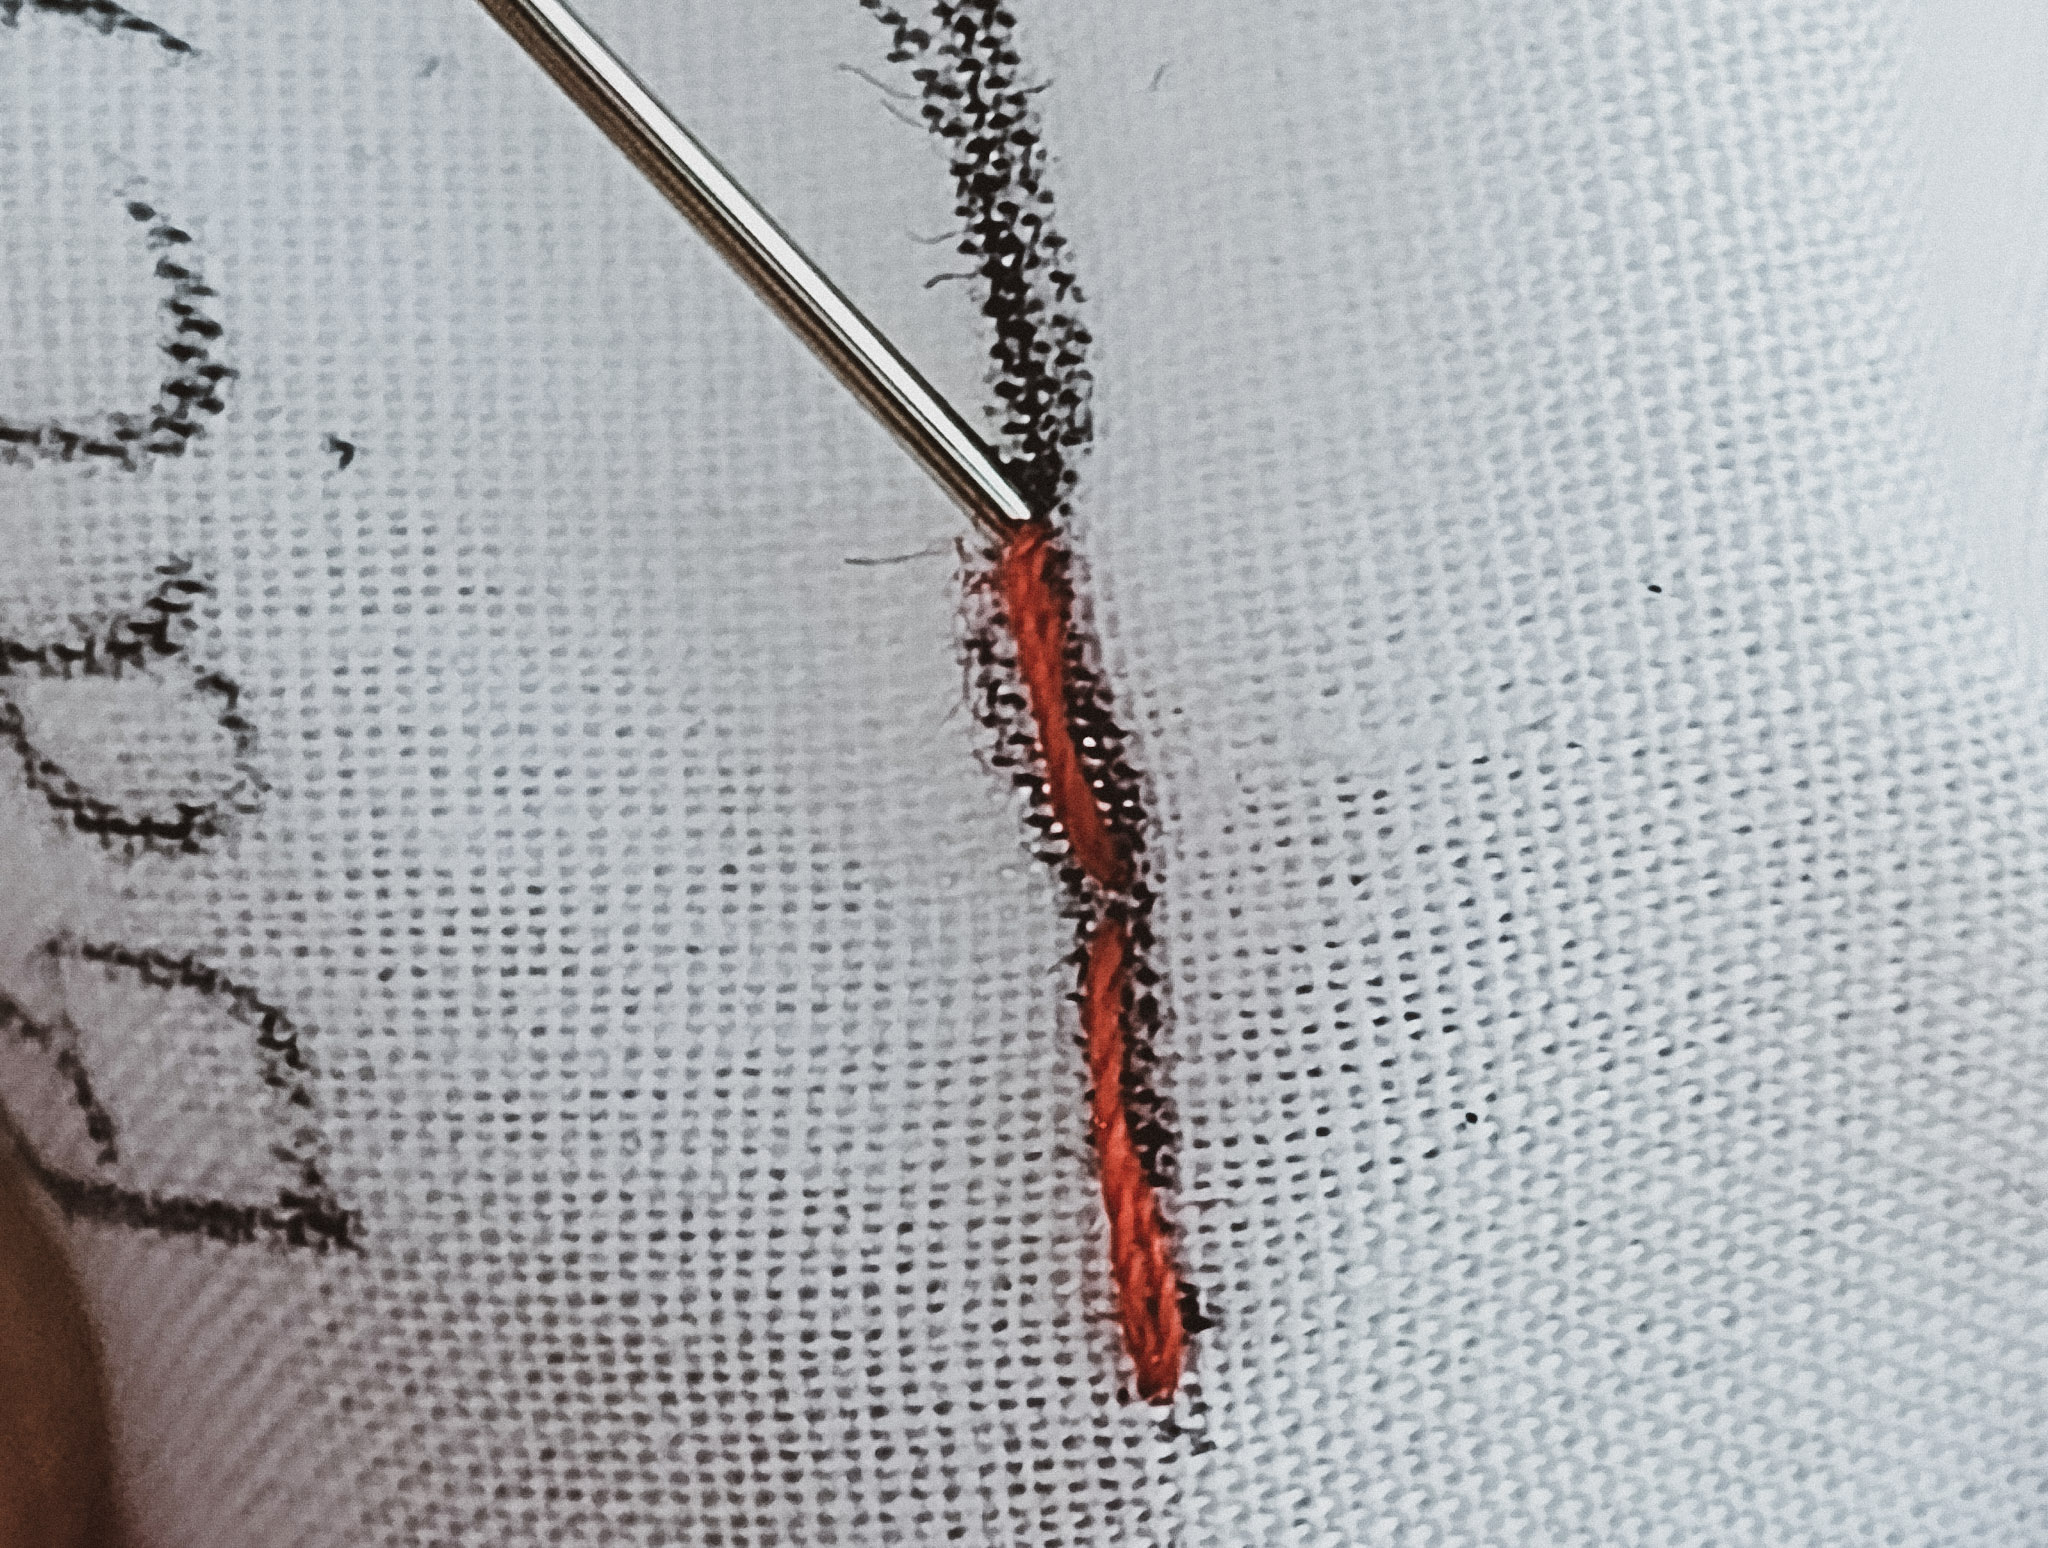 Coming up again with the needle next to the previous stitch